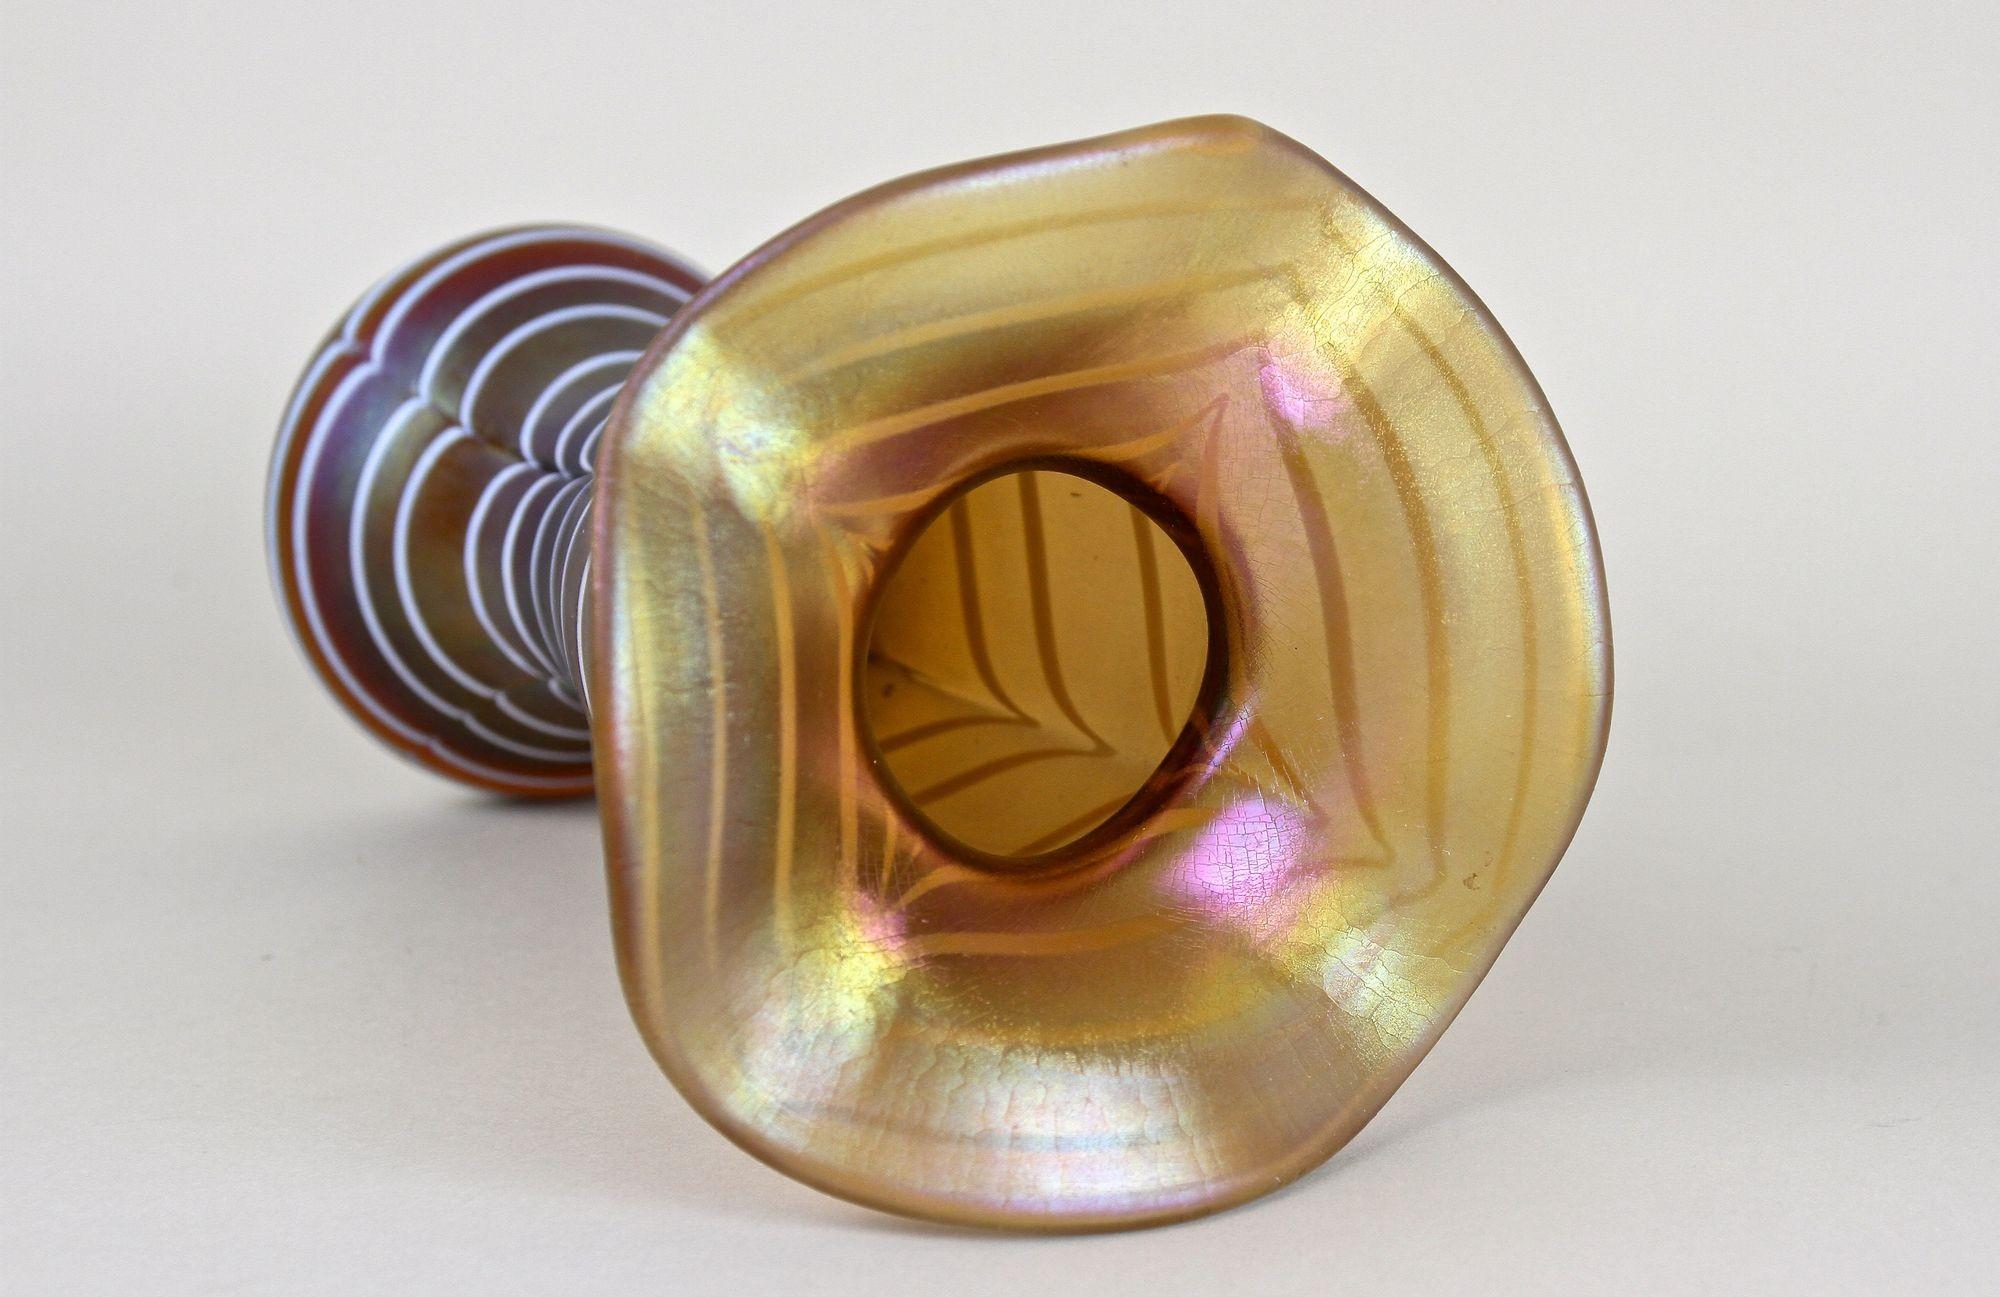 Art Nouveau Iridescent Glass Vase Attributed To Loetz Witwe, Bohemia, ca. 1915 For Sale 3